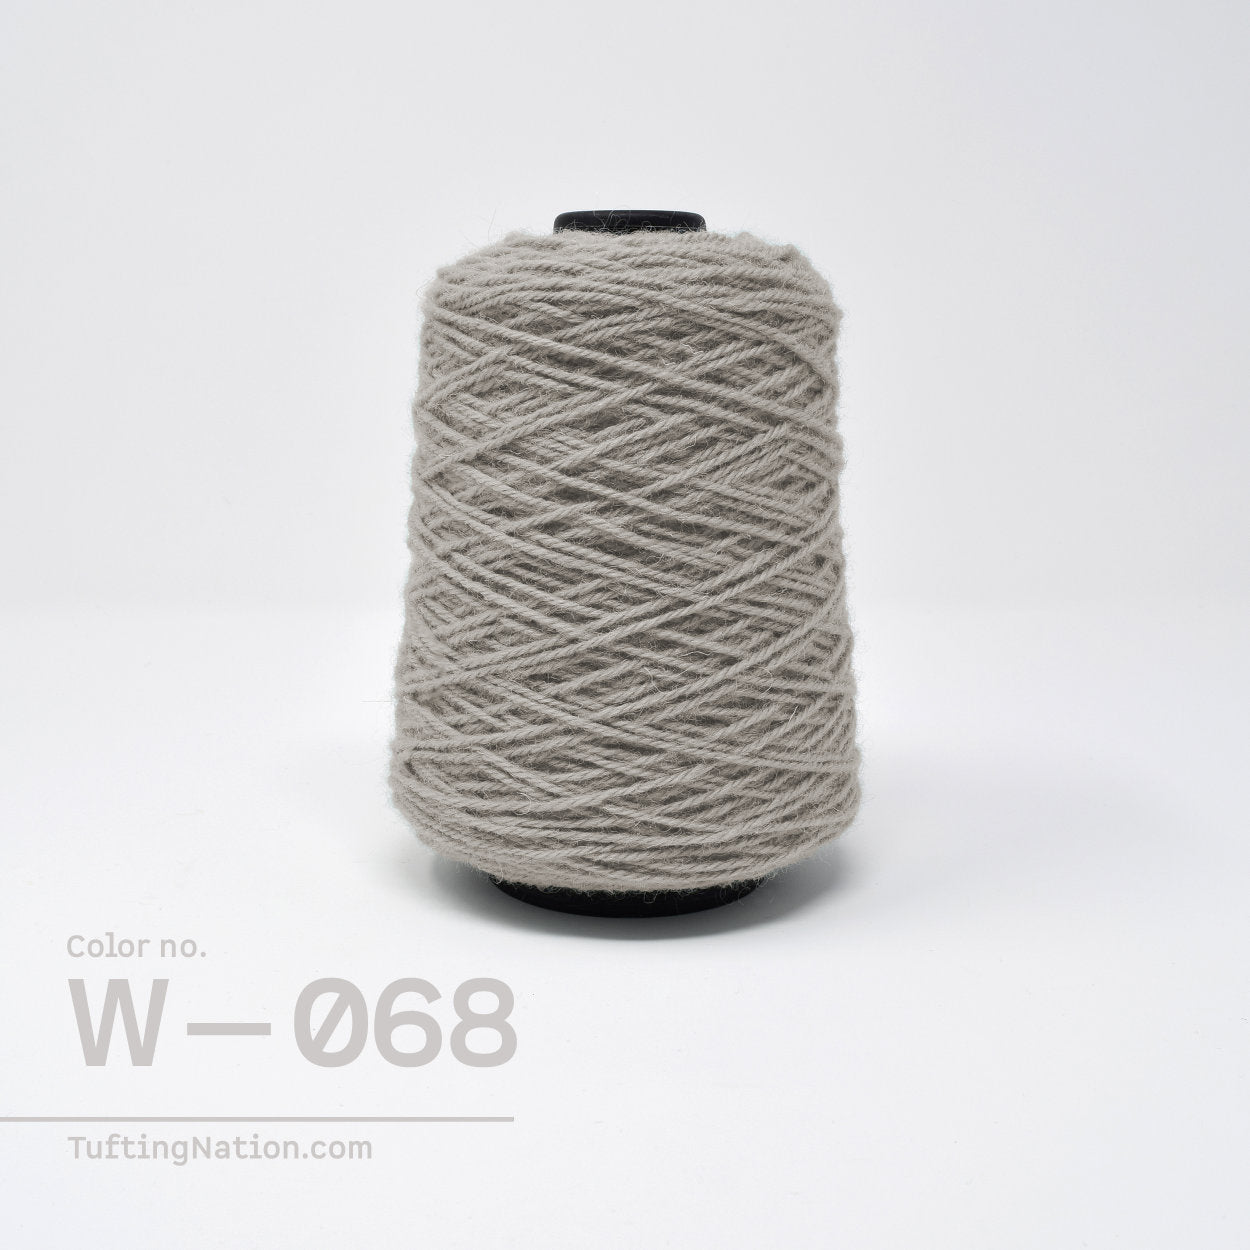 Does anyone ever tried this for tufting ? It's called The Wool